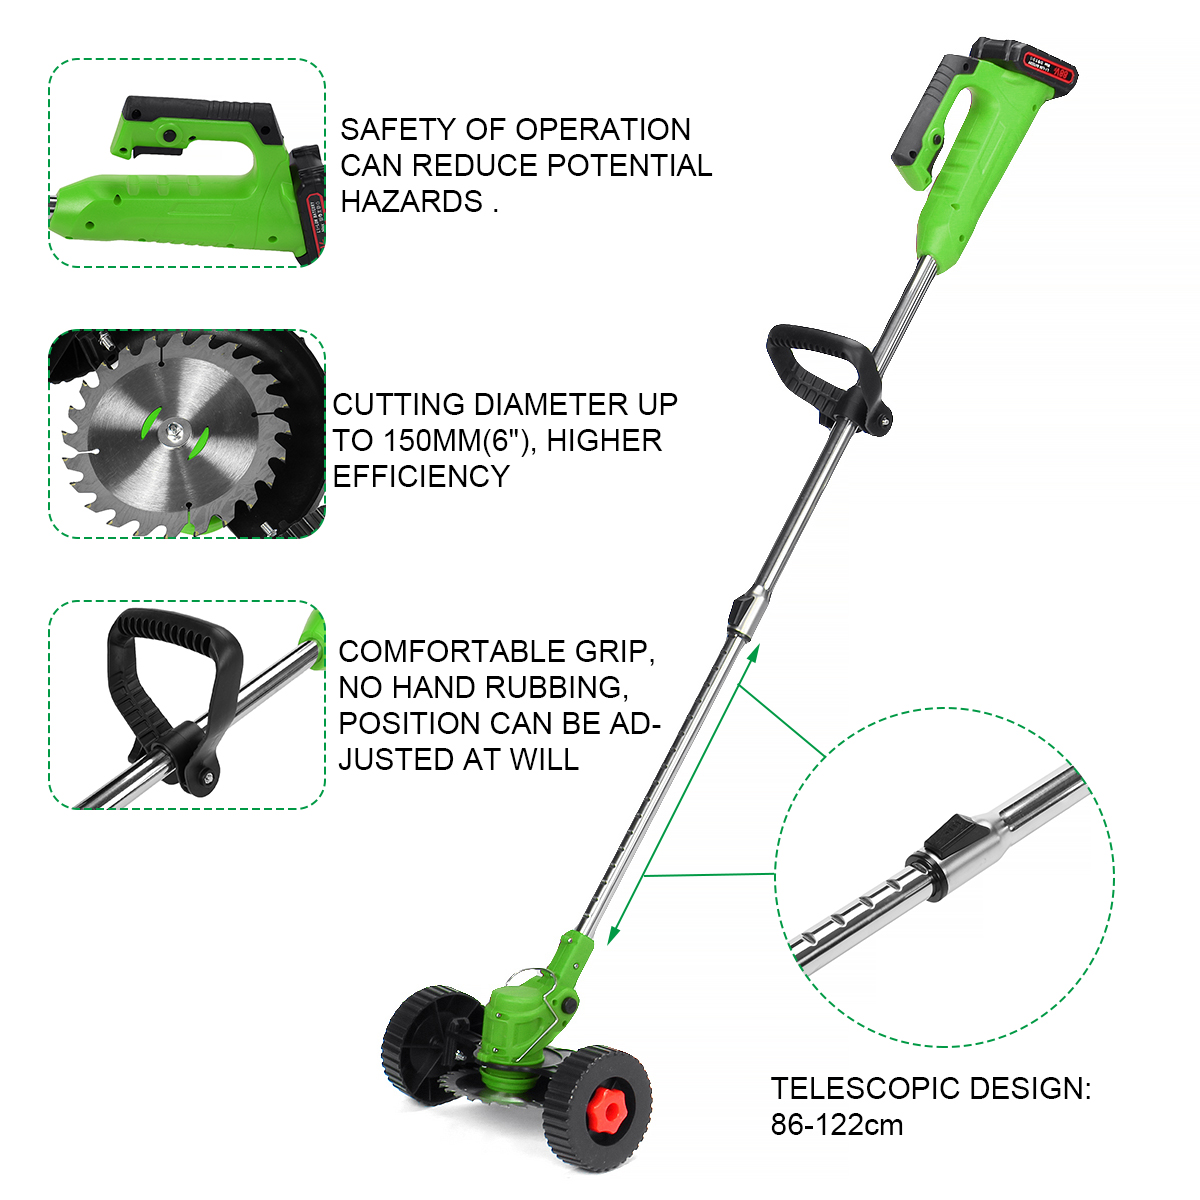 1500W Cordless Electric Grass Trimmer Weed Eater Edger Lawn Mower W/ 1/2 Battery